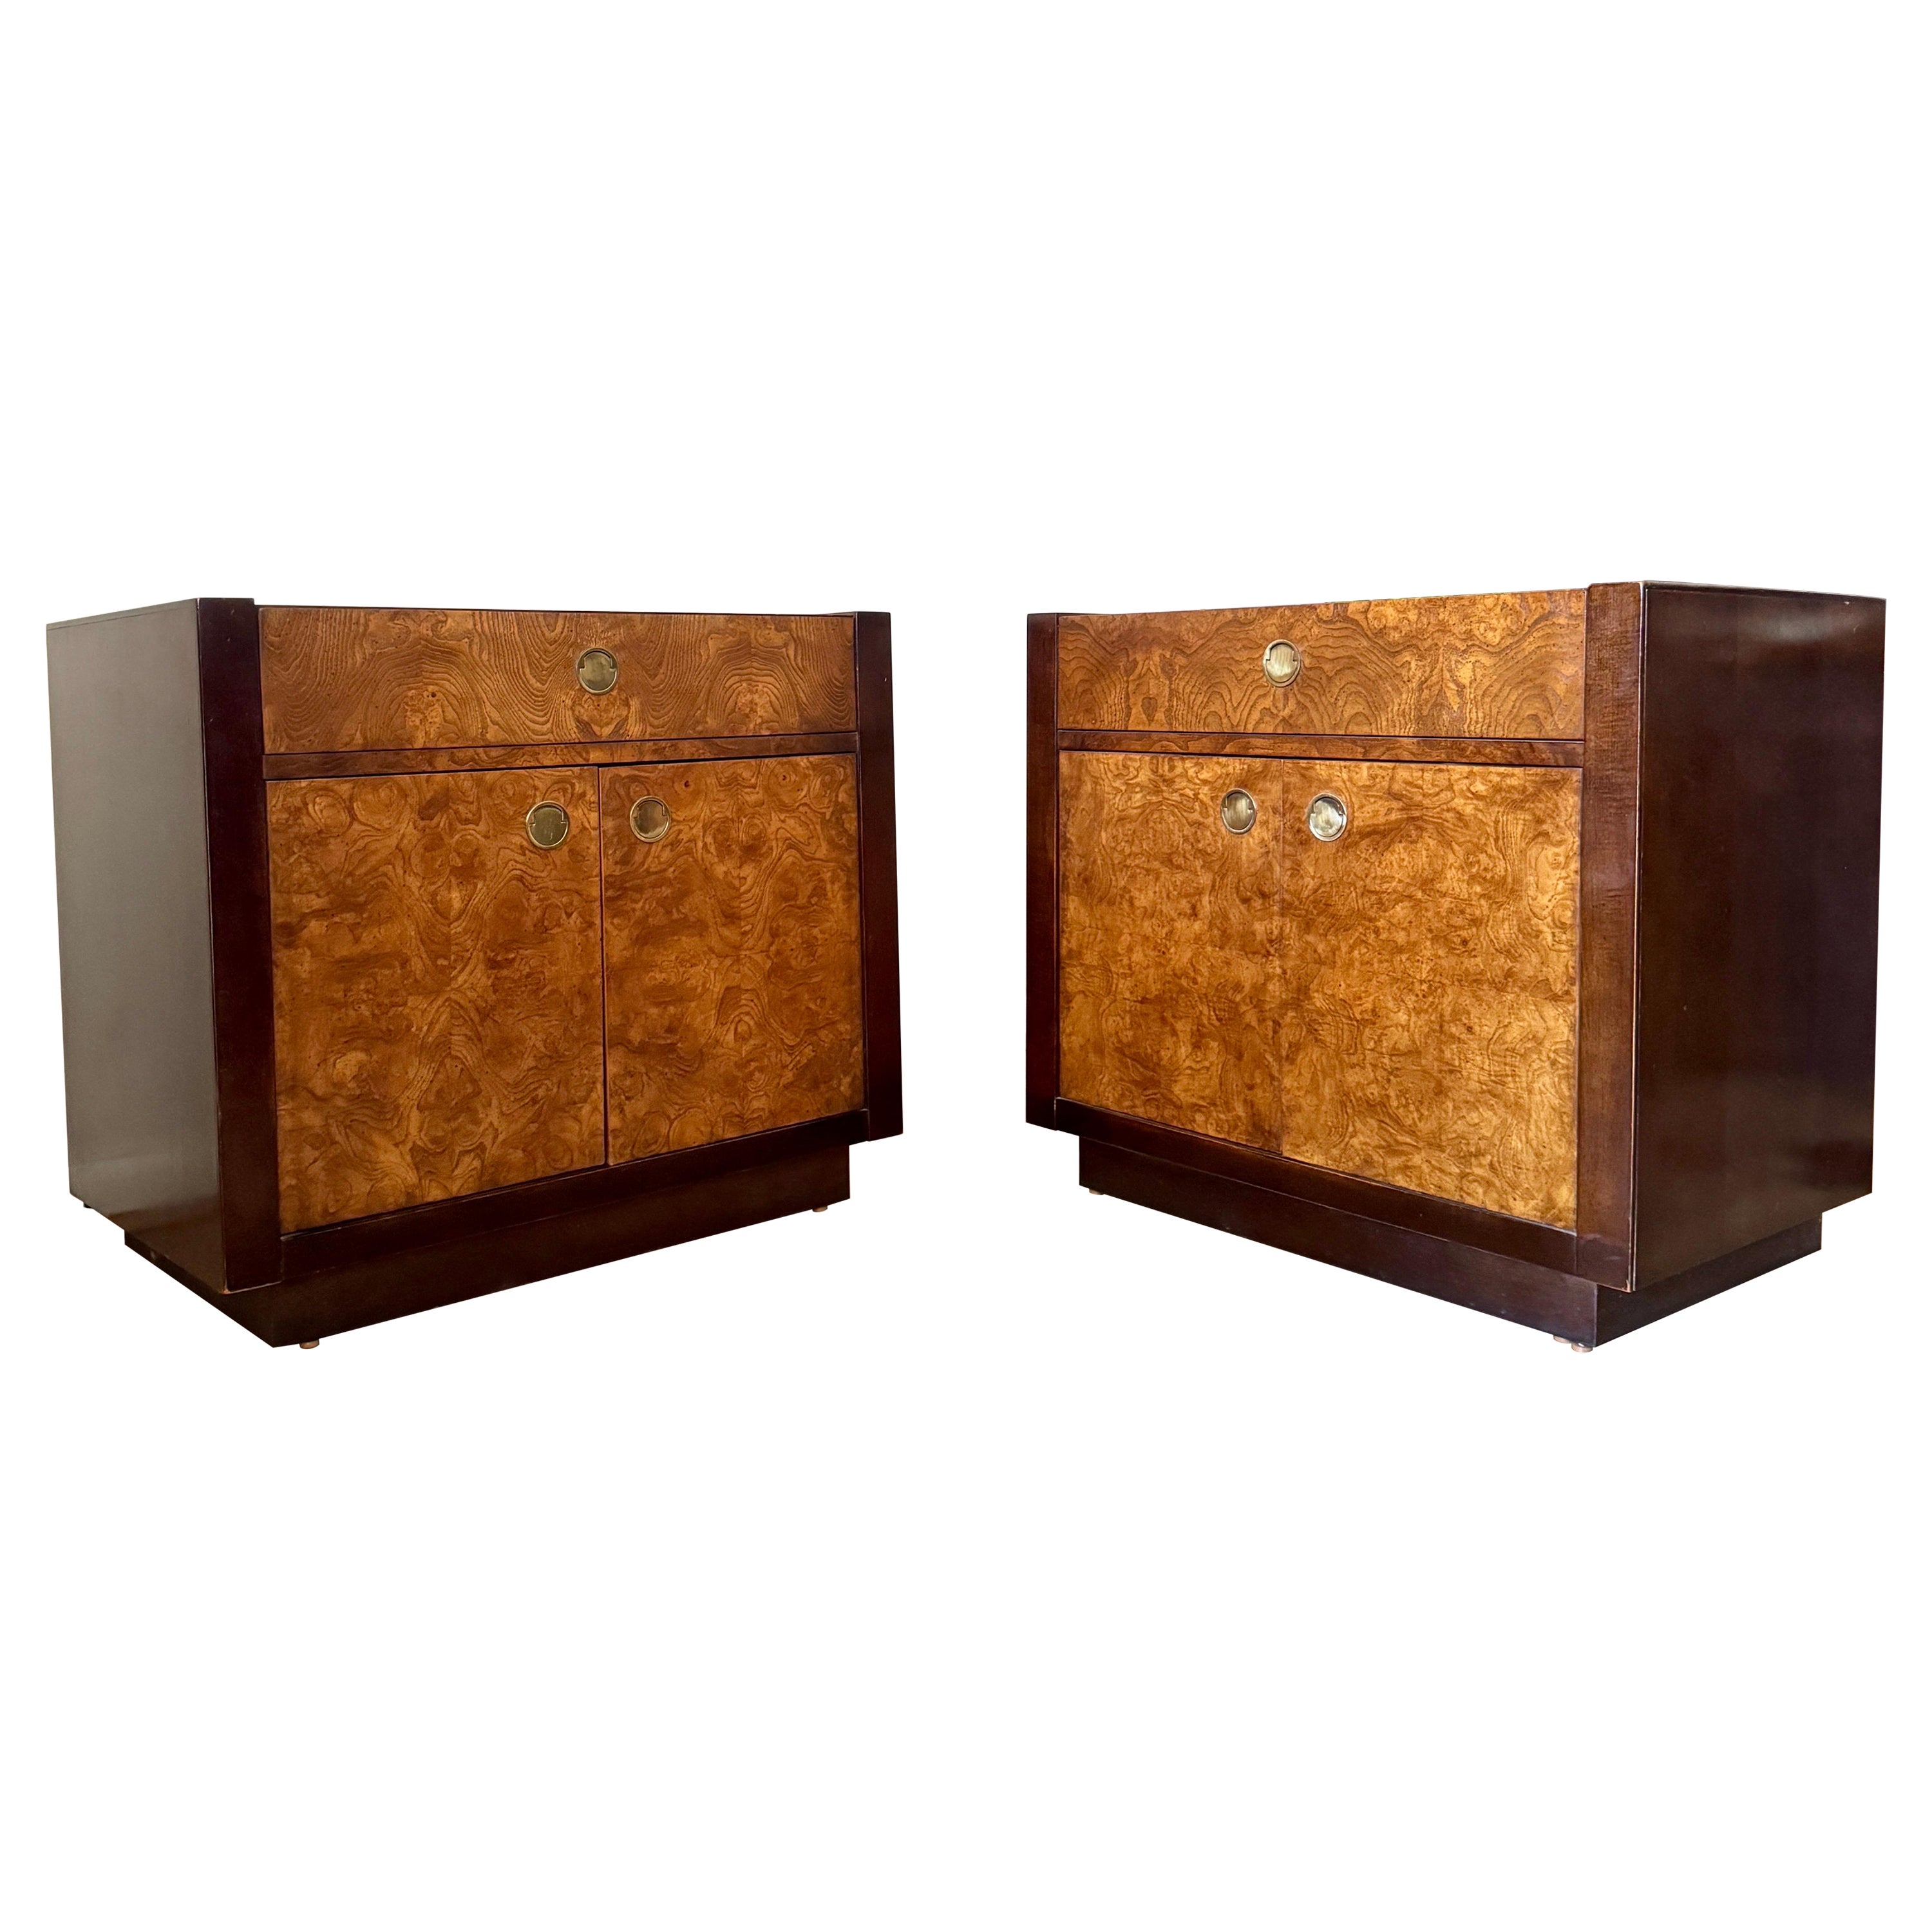 A Pair of 1970s Milo Baughman Style Burl Wood Nightstands by Century Furniture  For Sale